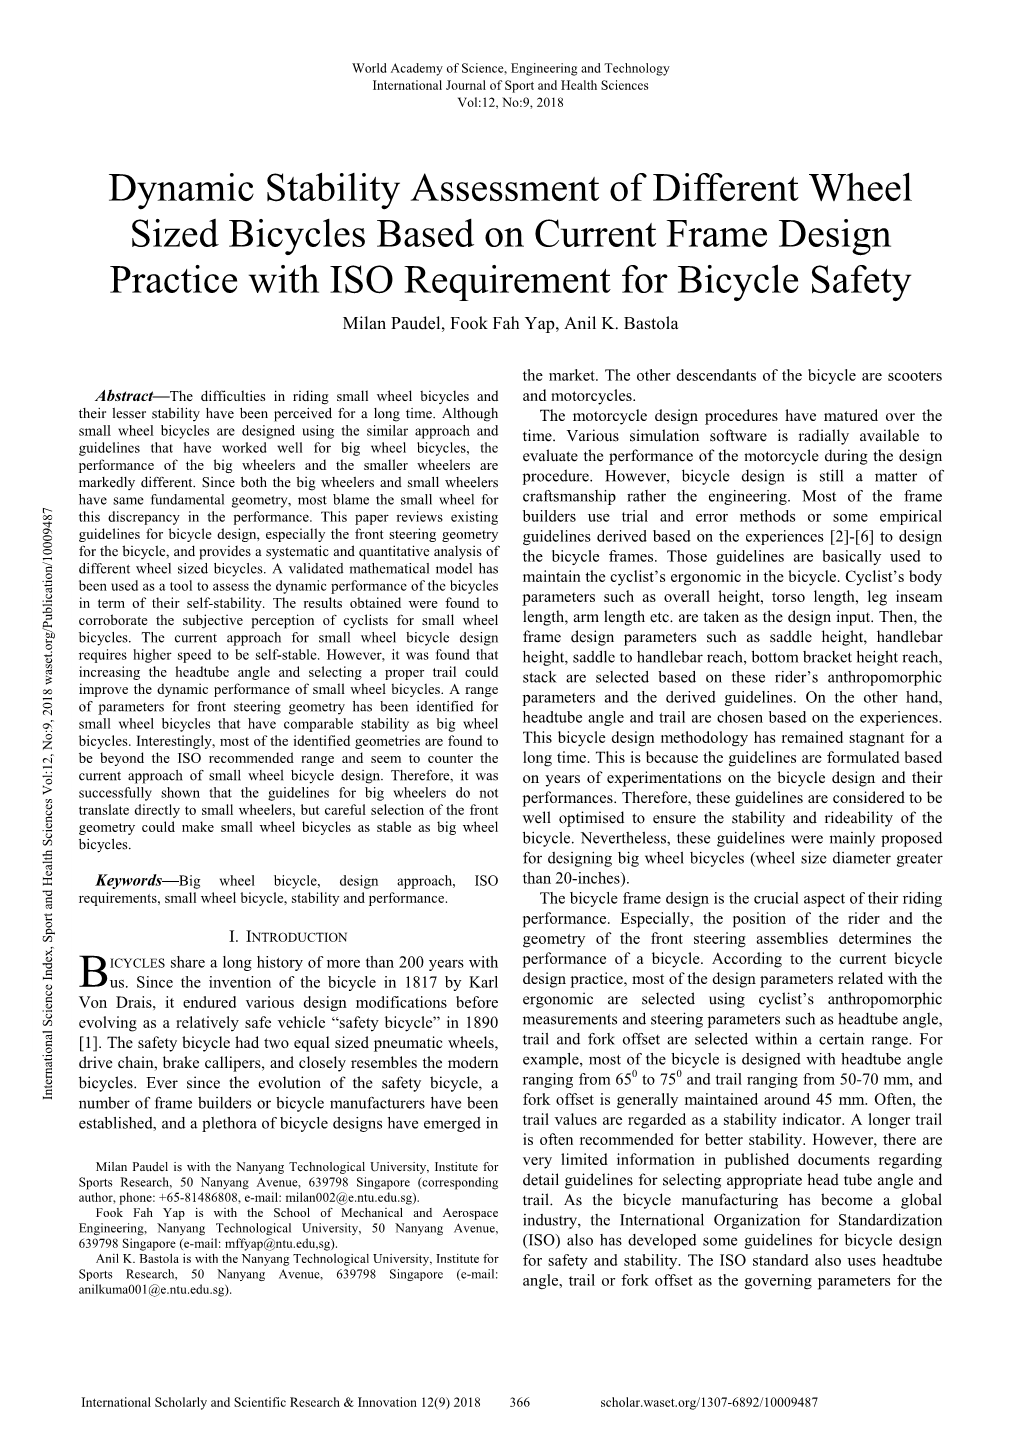 Dynamic Stability Assessment of Different Wheel Sized Bicycles Based on Current Frame Design Practice with ISO Requirement for B